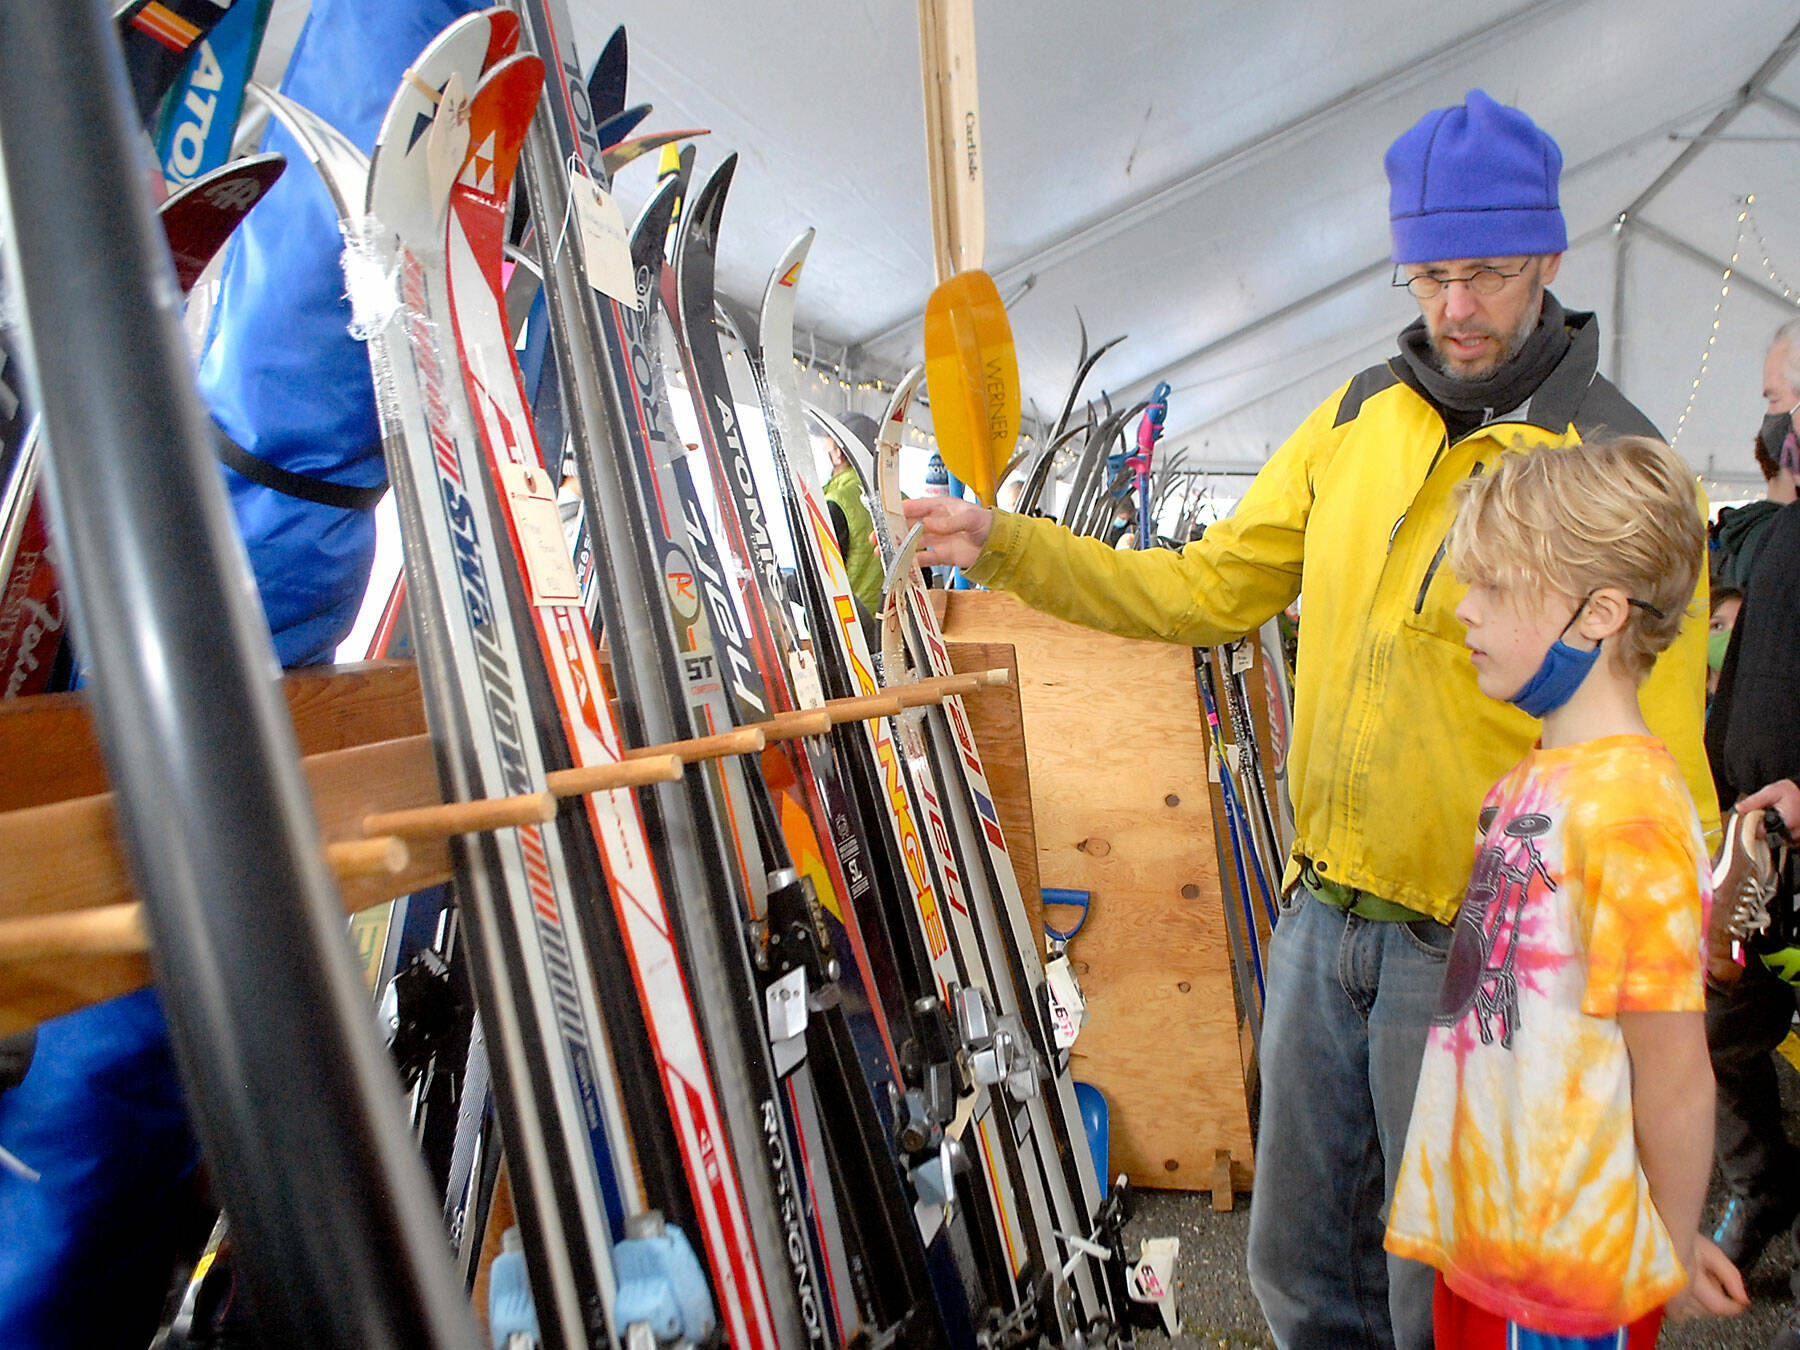 Ned Hammar of Port Angeles and his son, Felix Lubinski Hammar, 9, examine a rack of snow skies during the Winterfest ski swap in the Black Ball Ferry parking lot on the Port Angeles waterfront on Nov. 20. The event, a fundraiser for the Hurricane Ridge Winter Sports Club, featured a variety of skis, snowboards and related sports gear. Photo by Keith Thorpe/Olympic Peninsula News Group